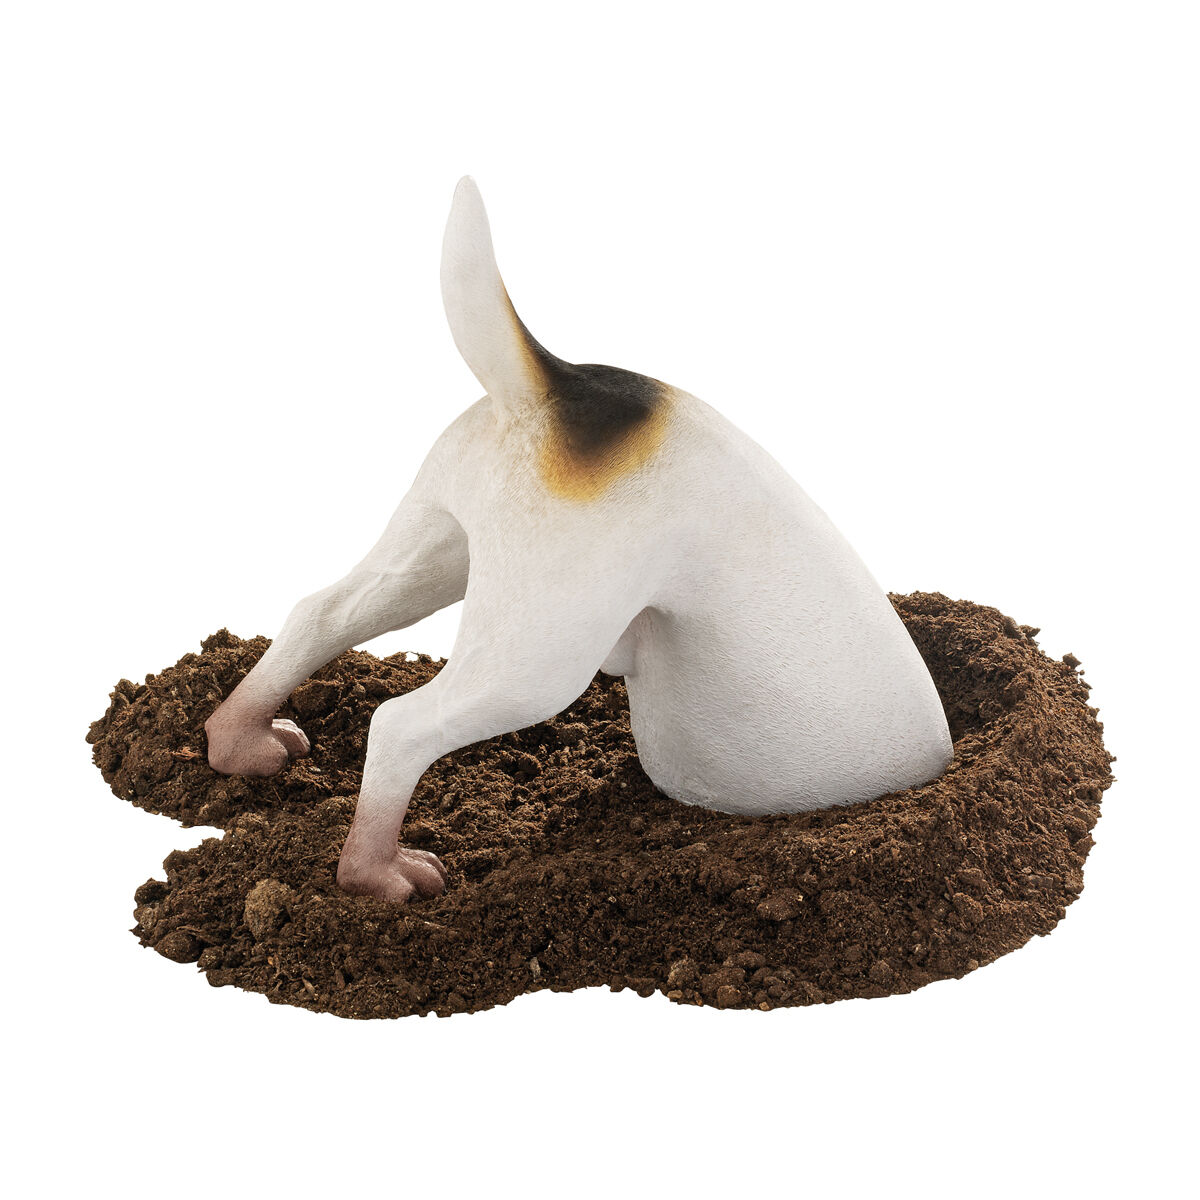 Puppy Dog Terrier Breed Man\'s Best Friend Digging a Hole Canine Animal Sculpture